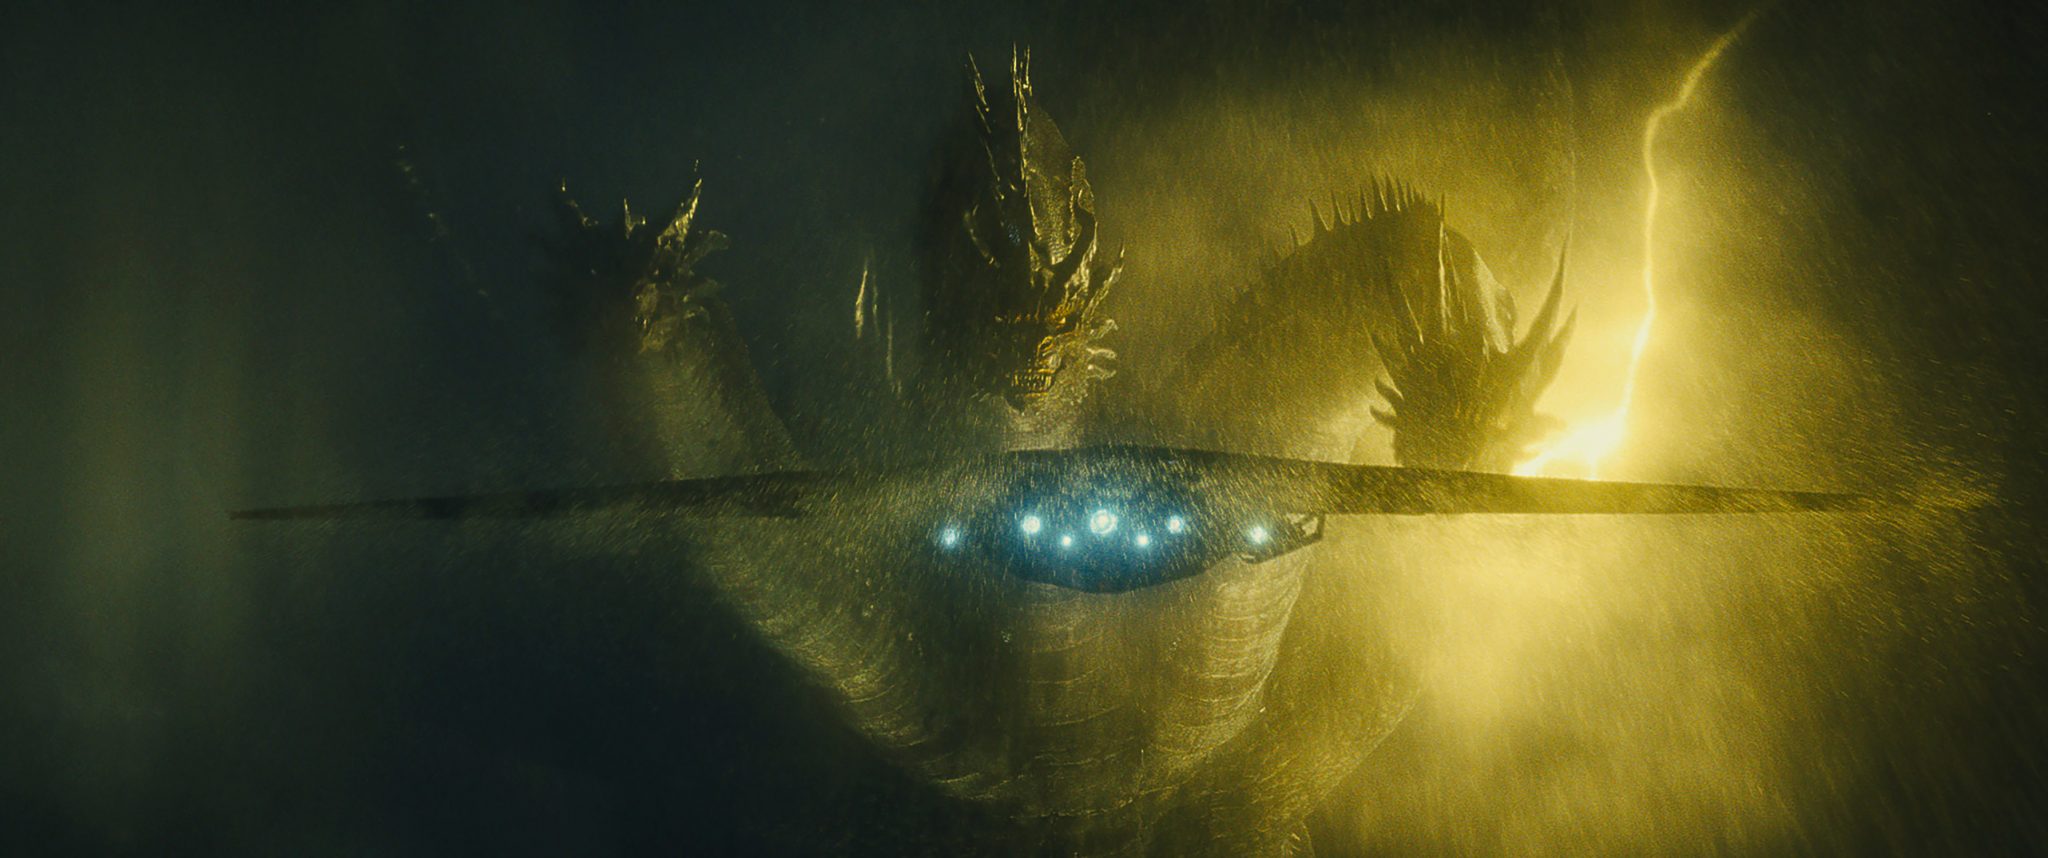 godzilla-2-king-of-the-monsters-ghidorah-recensione-5